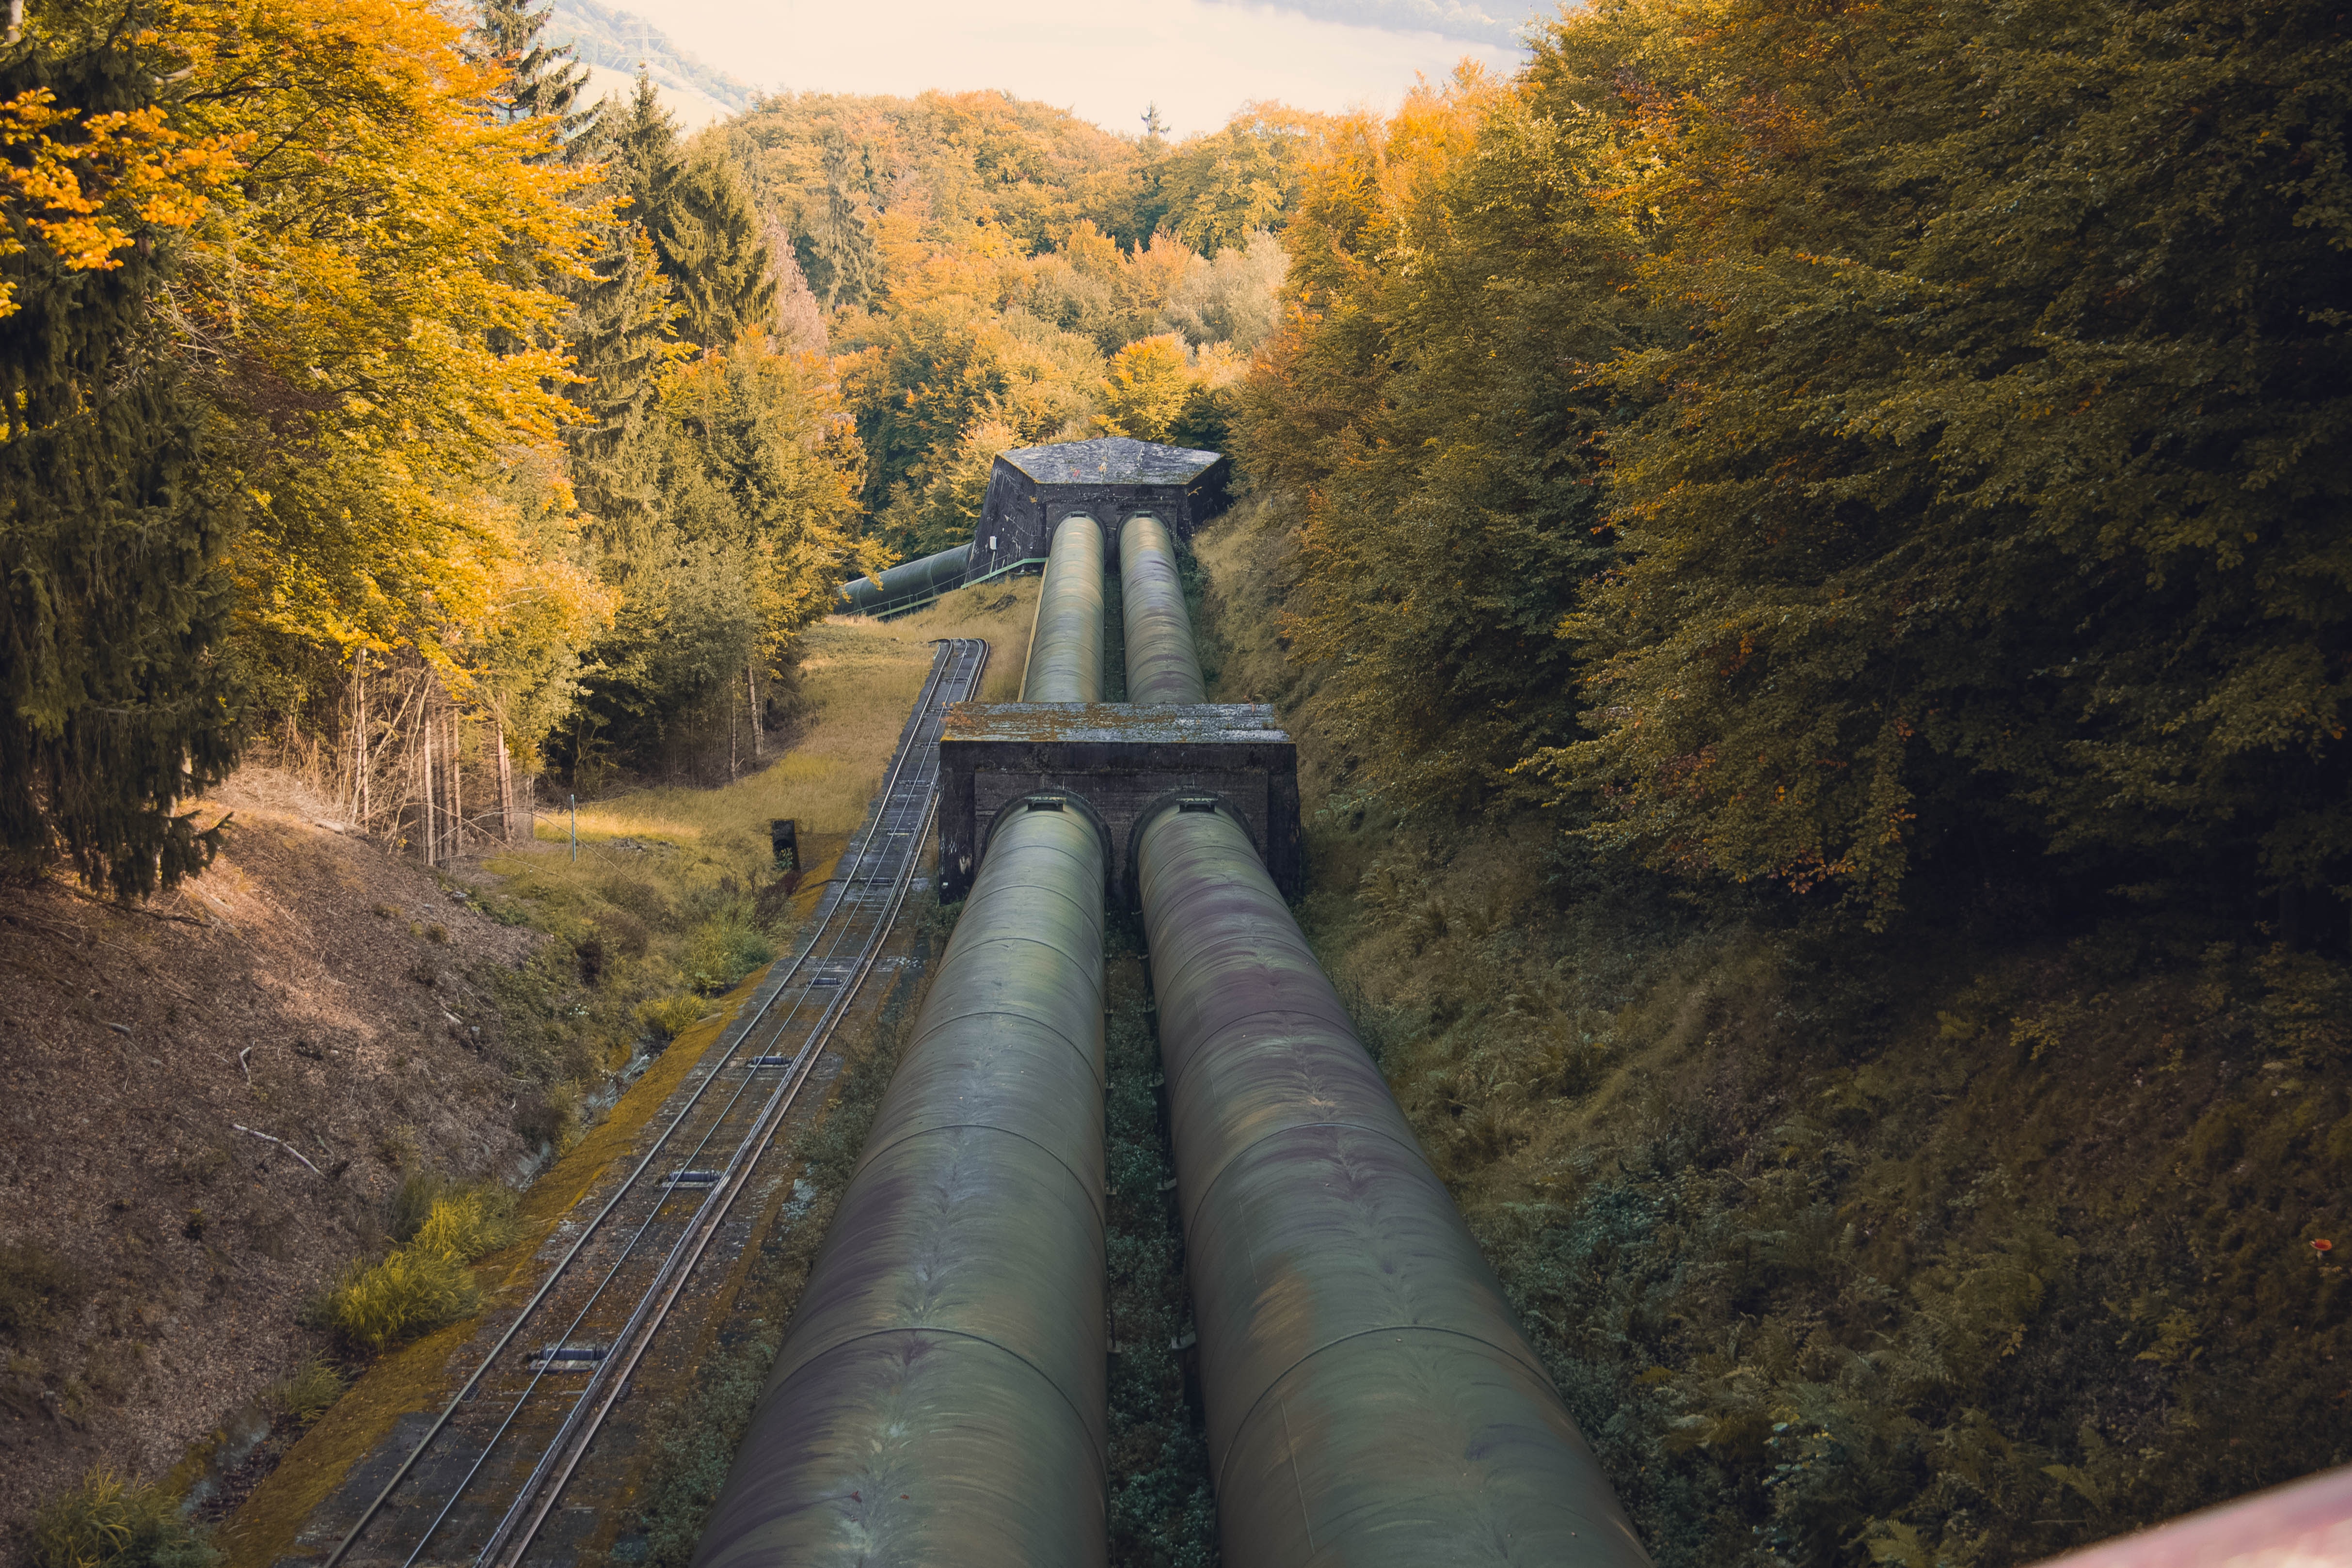 Pipeline Integrity System